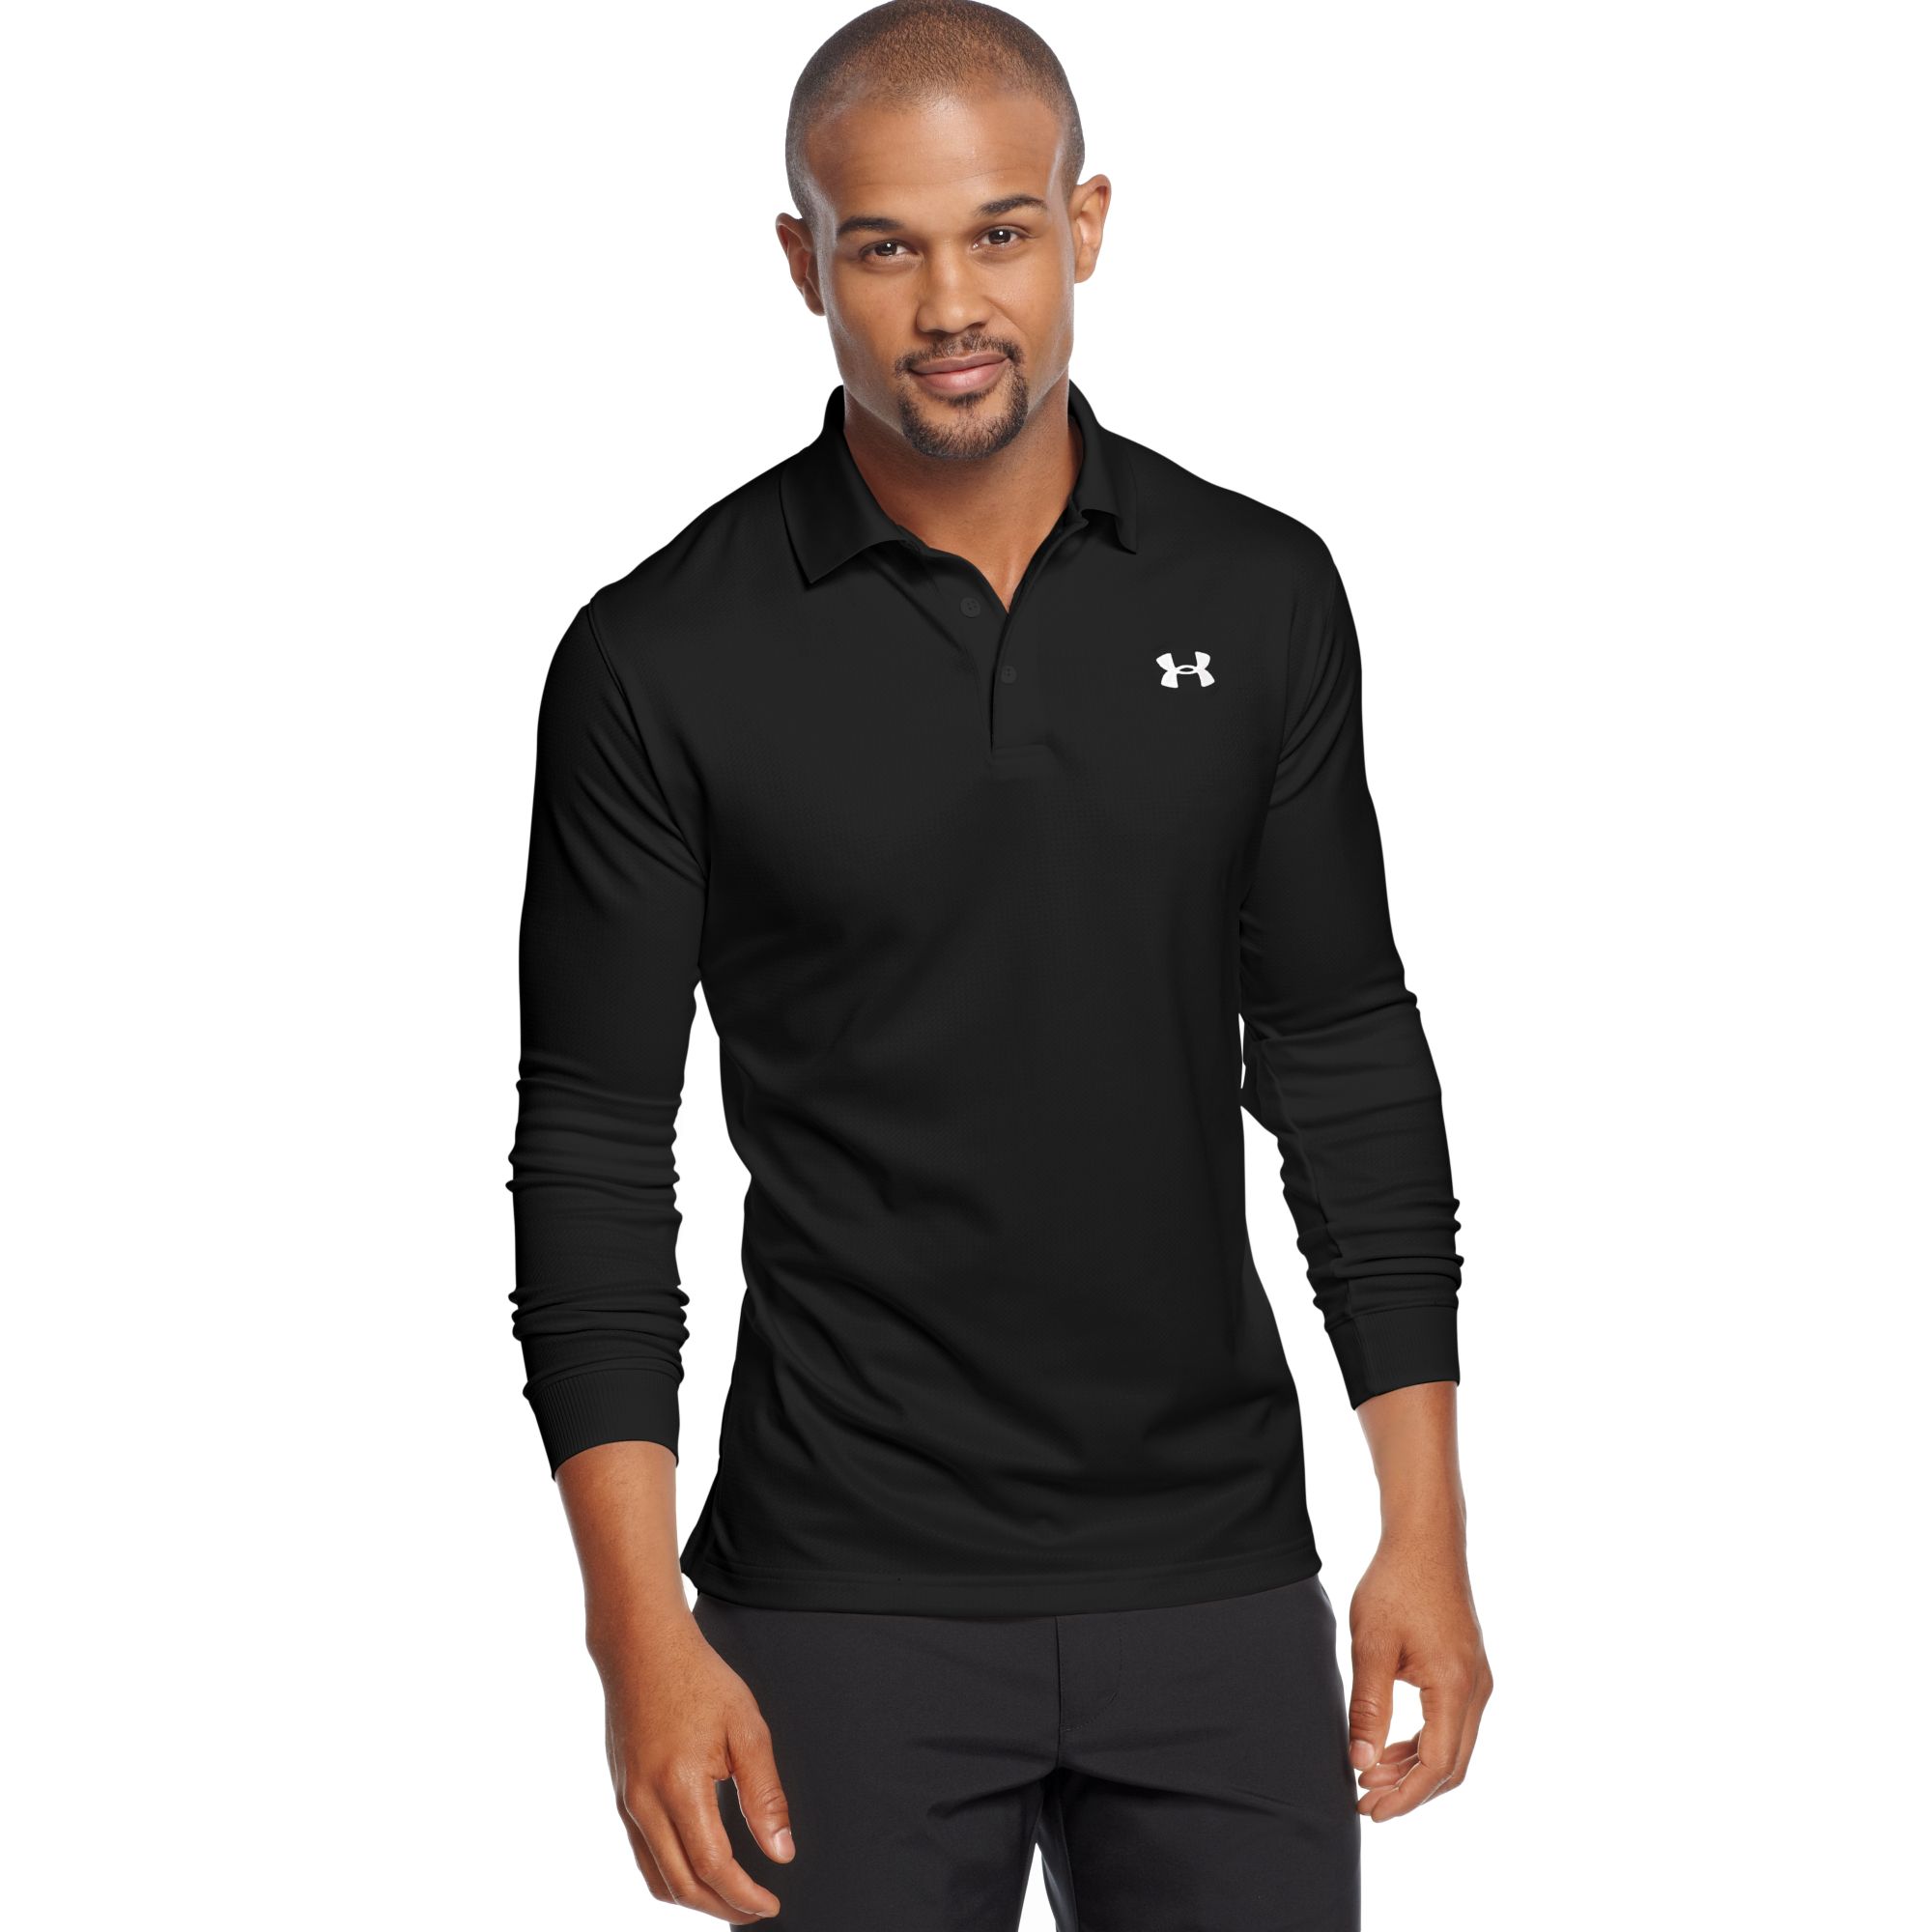 Under Armour Longsleeve Performance Polo Shirt in Black for Men - Lyst